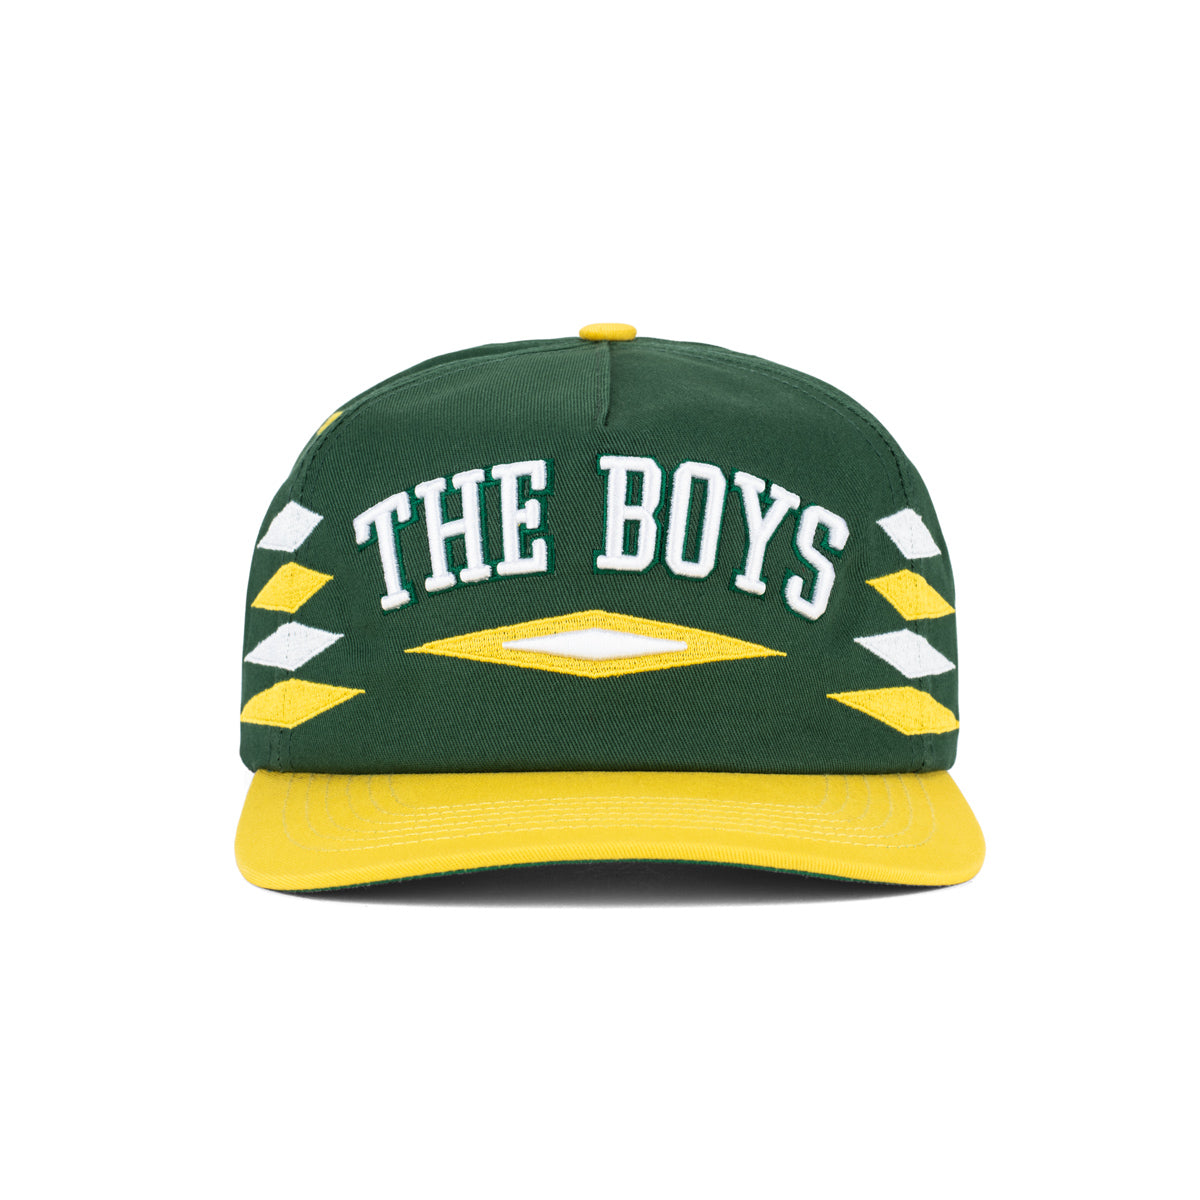 The Boys Diamond Retro Hat-Hats-Bussin With The Boys-Green/Yellow-OS-Barstool Sports